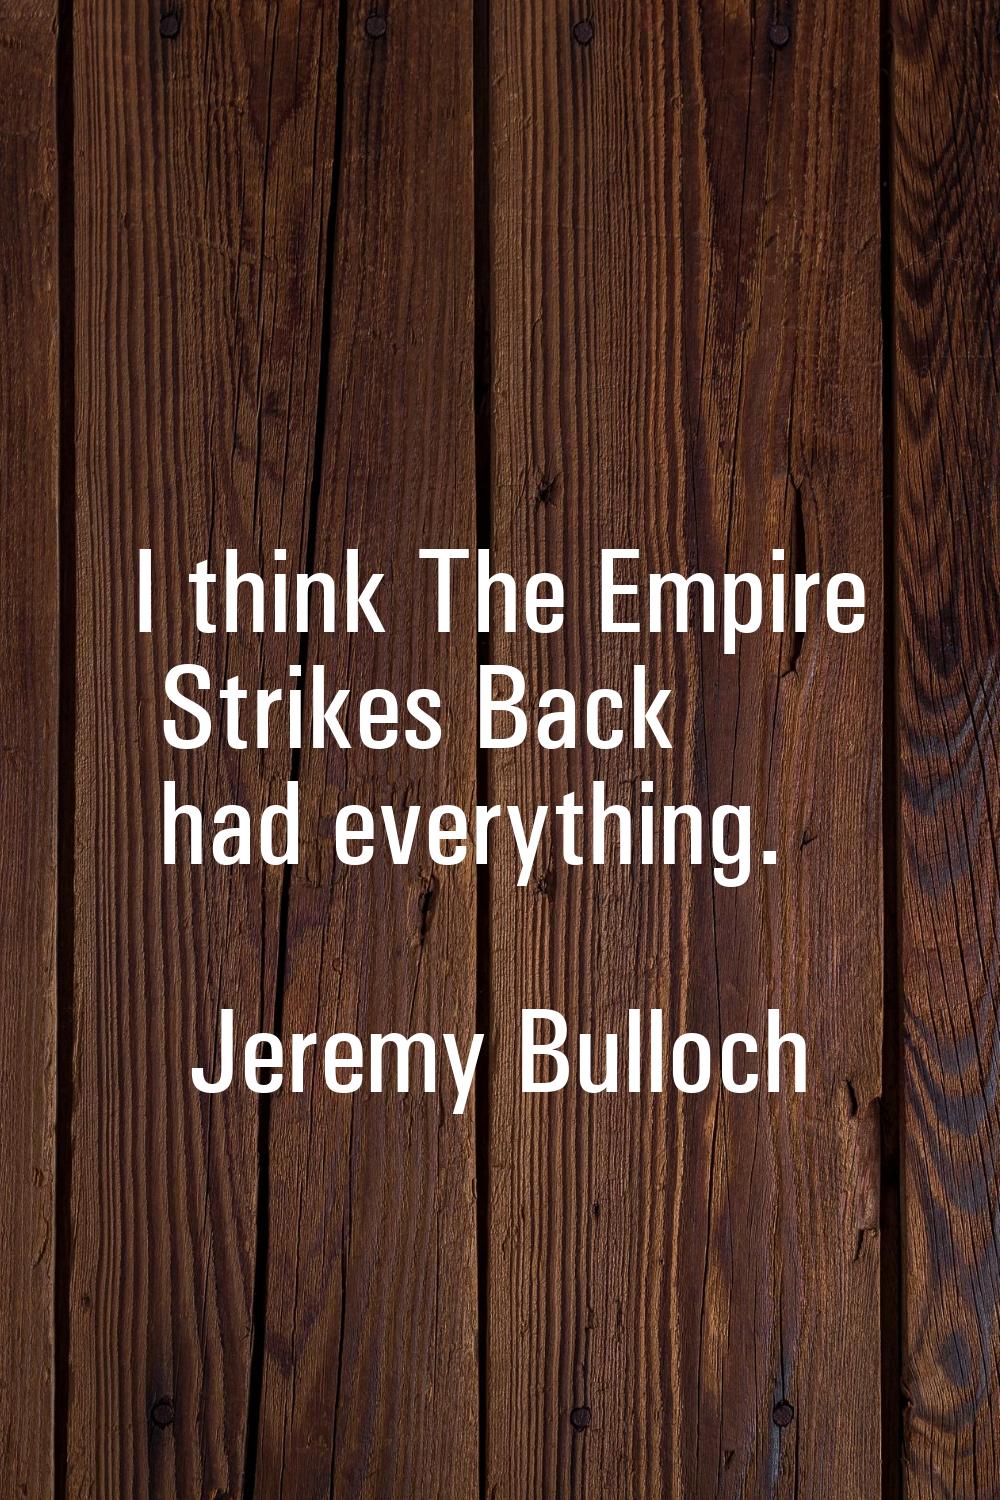 I think The Empire Strikes Back had everything.